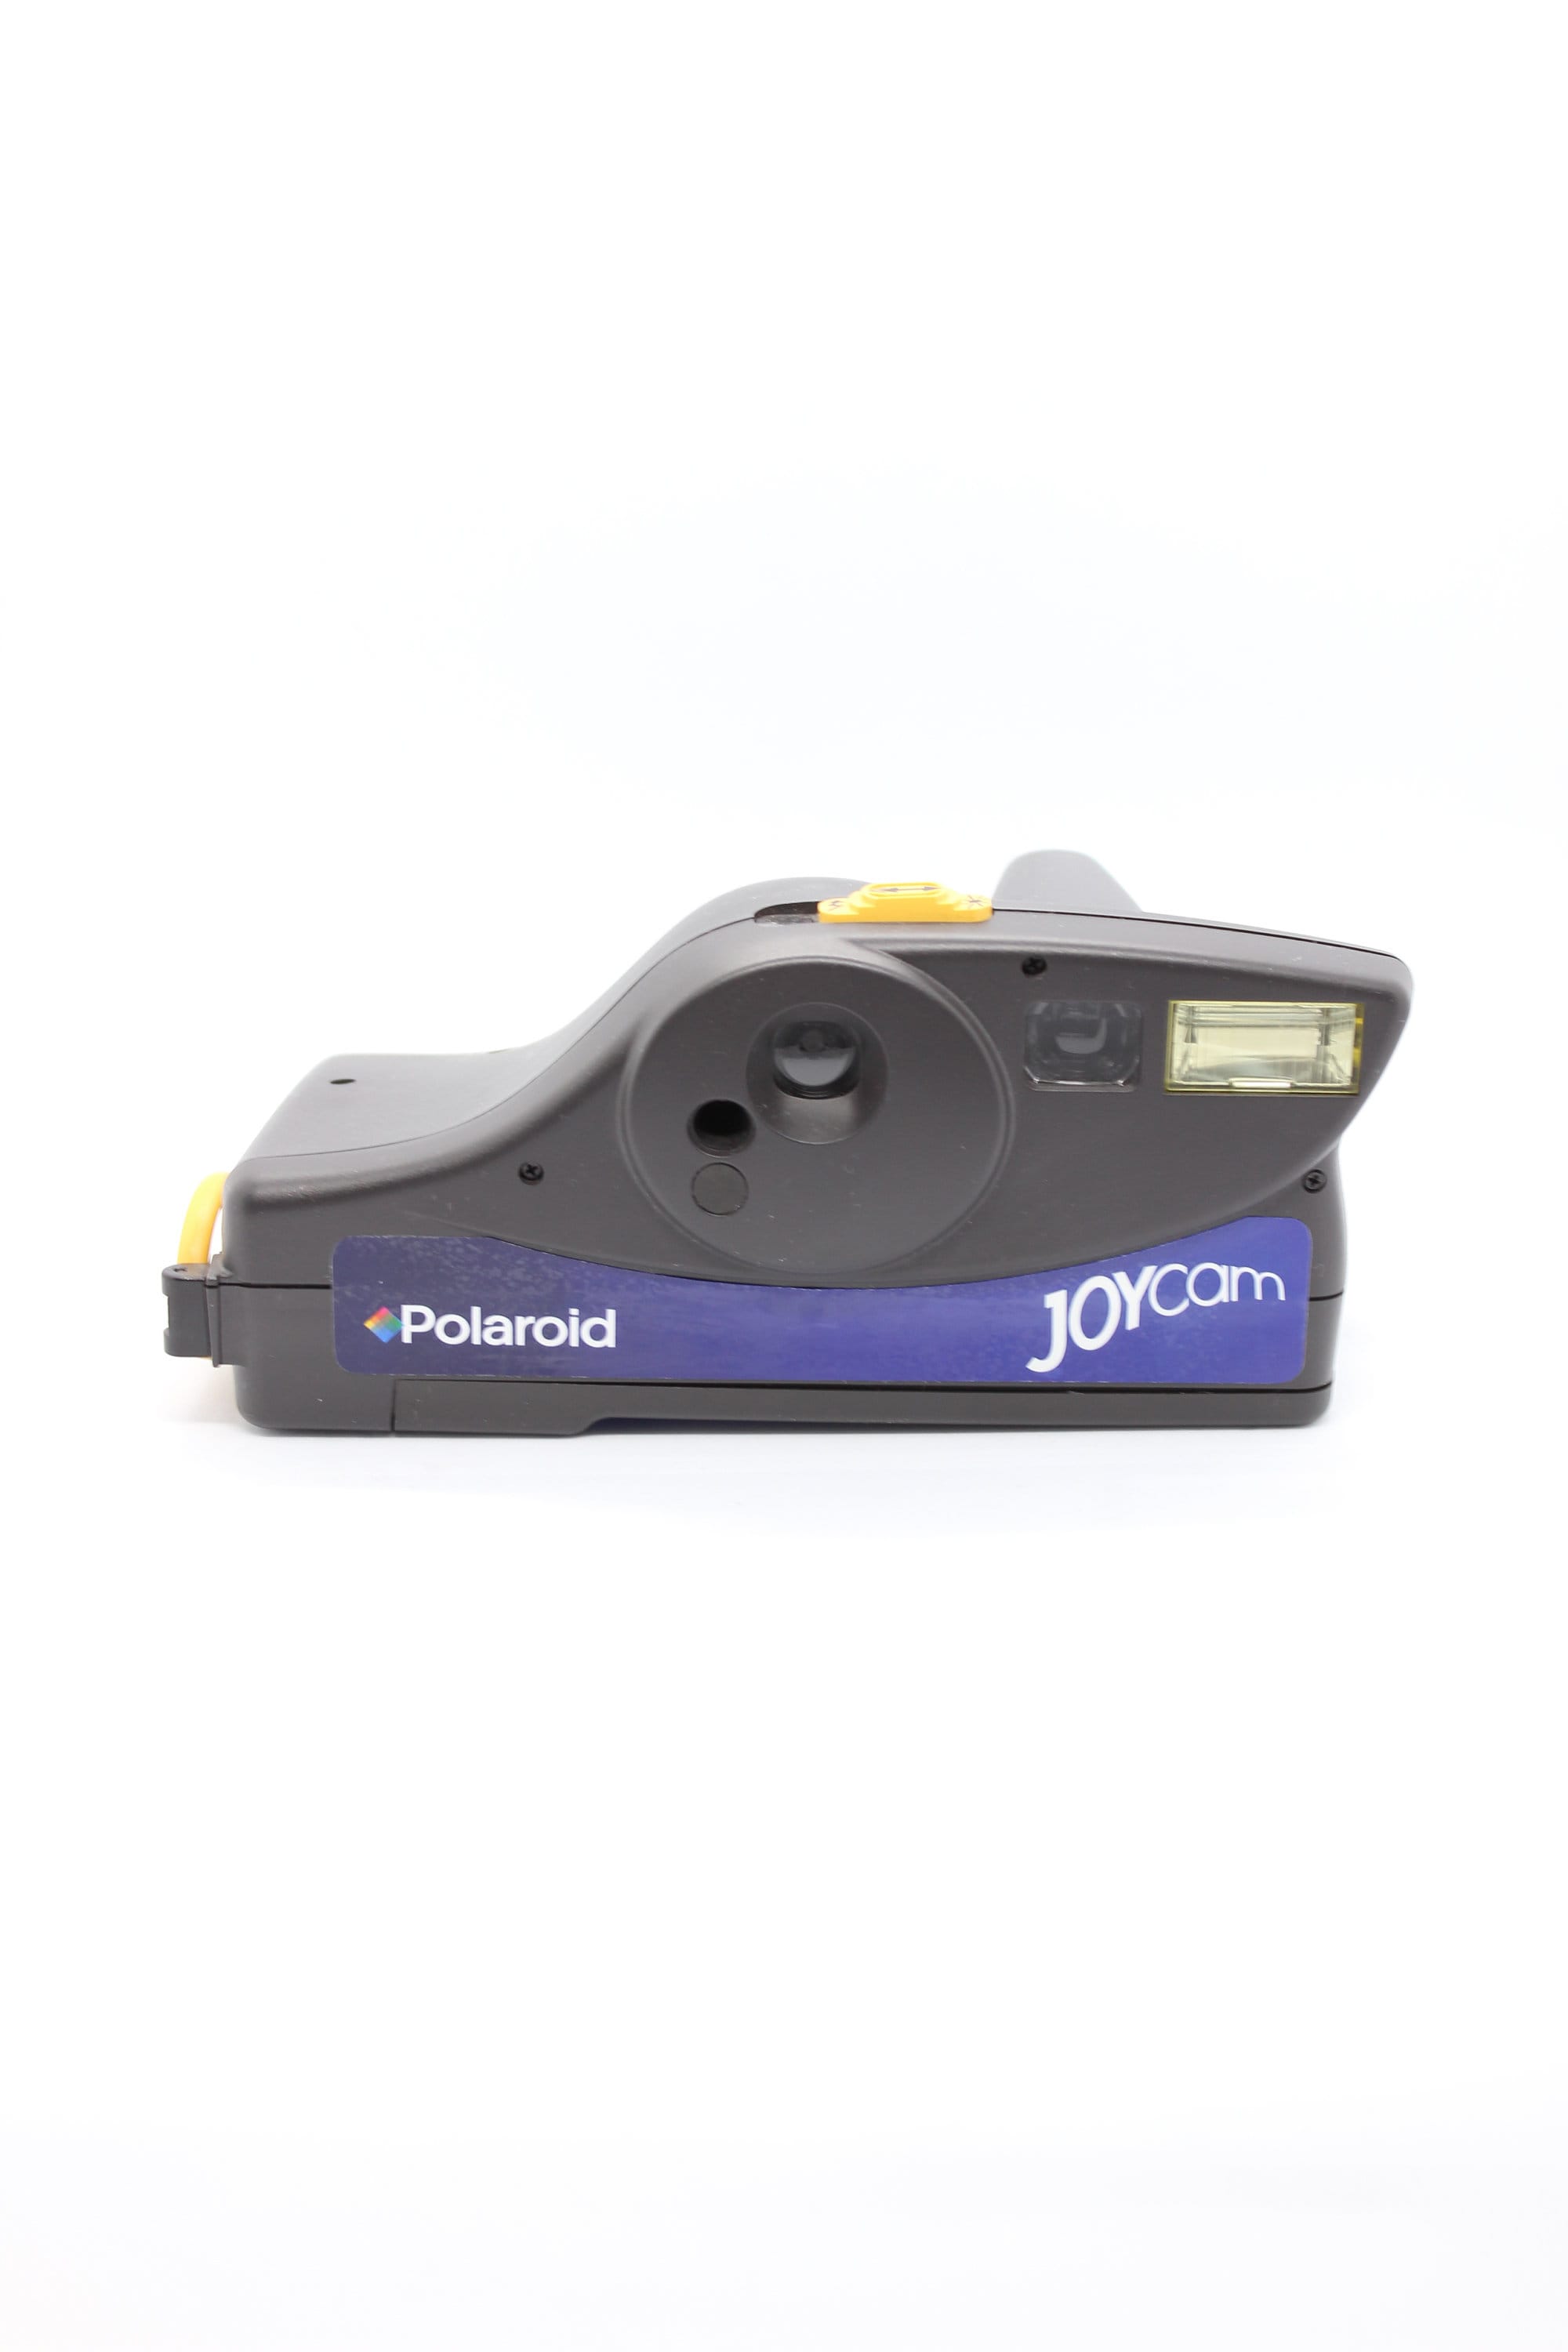 Polaroid Joycam – Vintage and Other Things